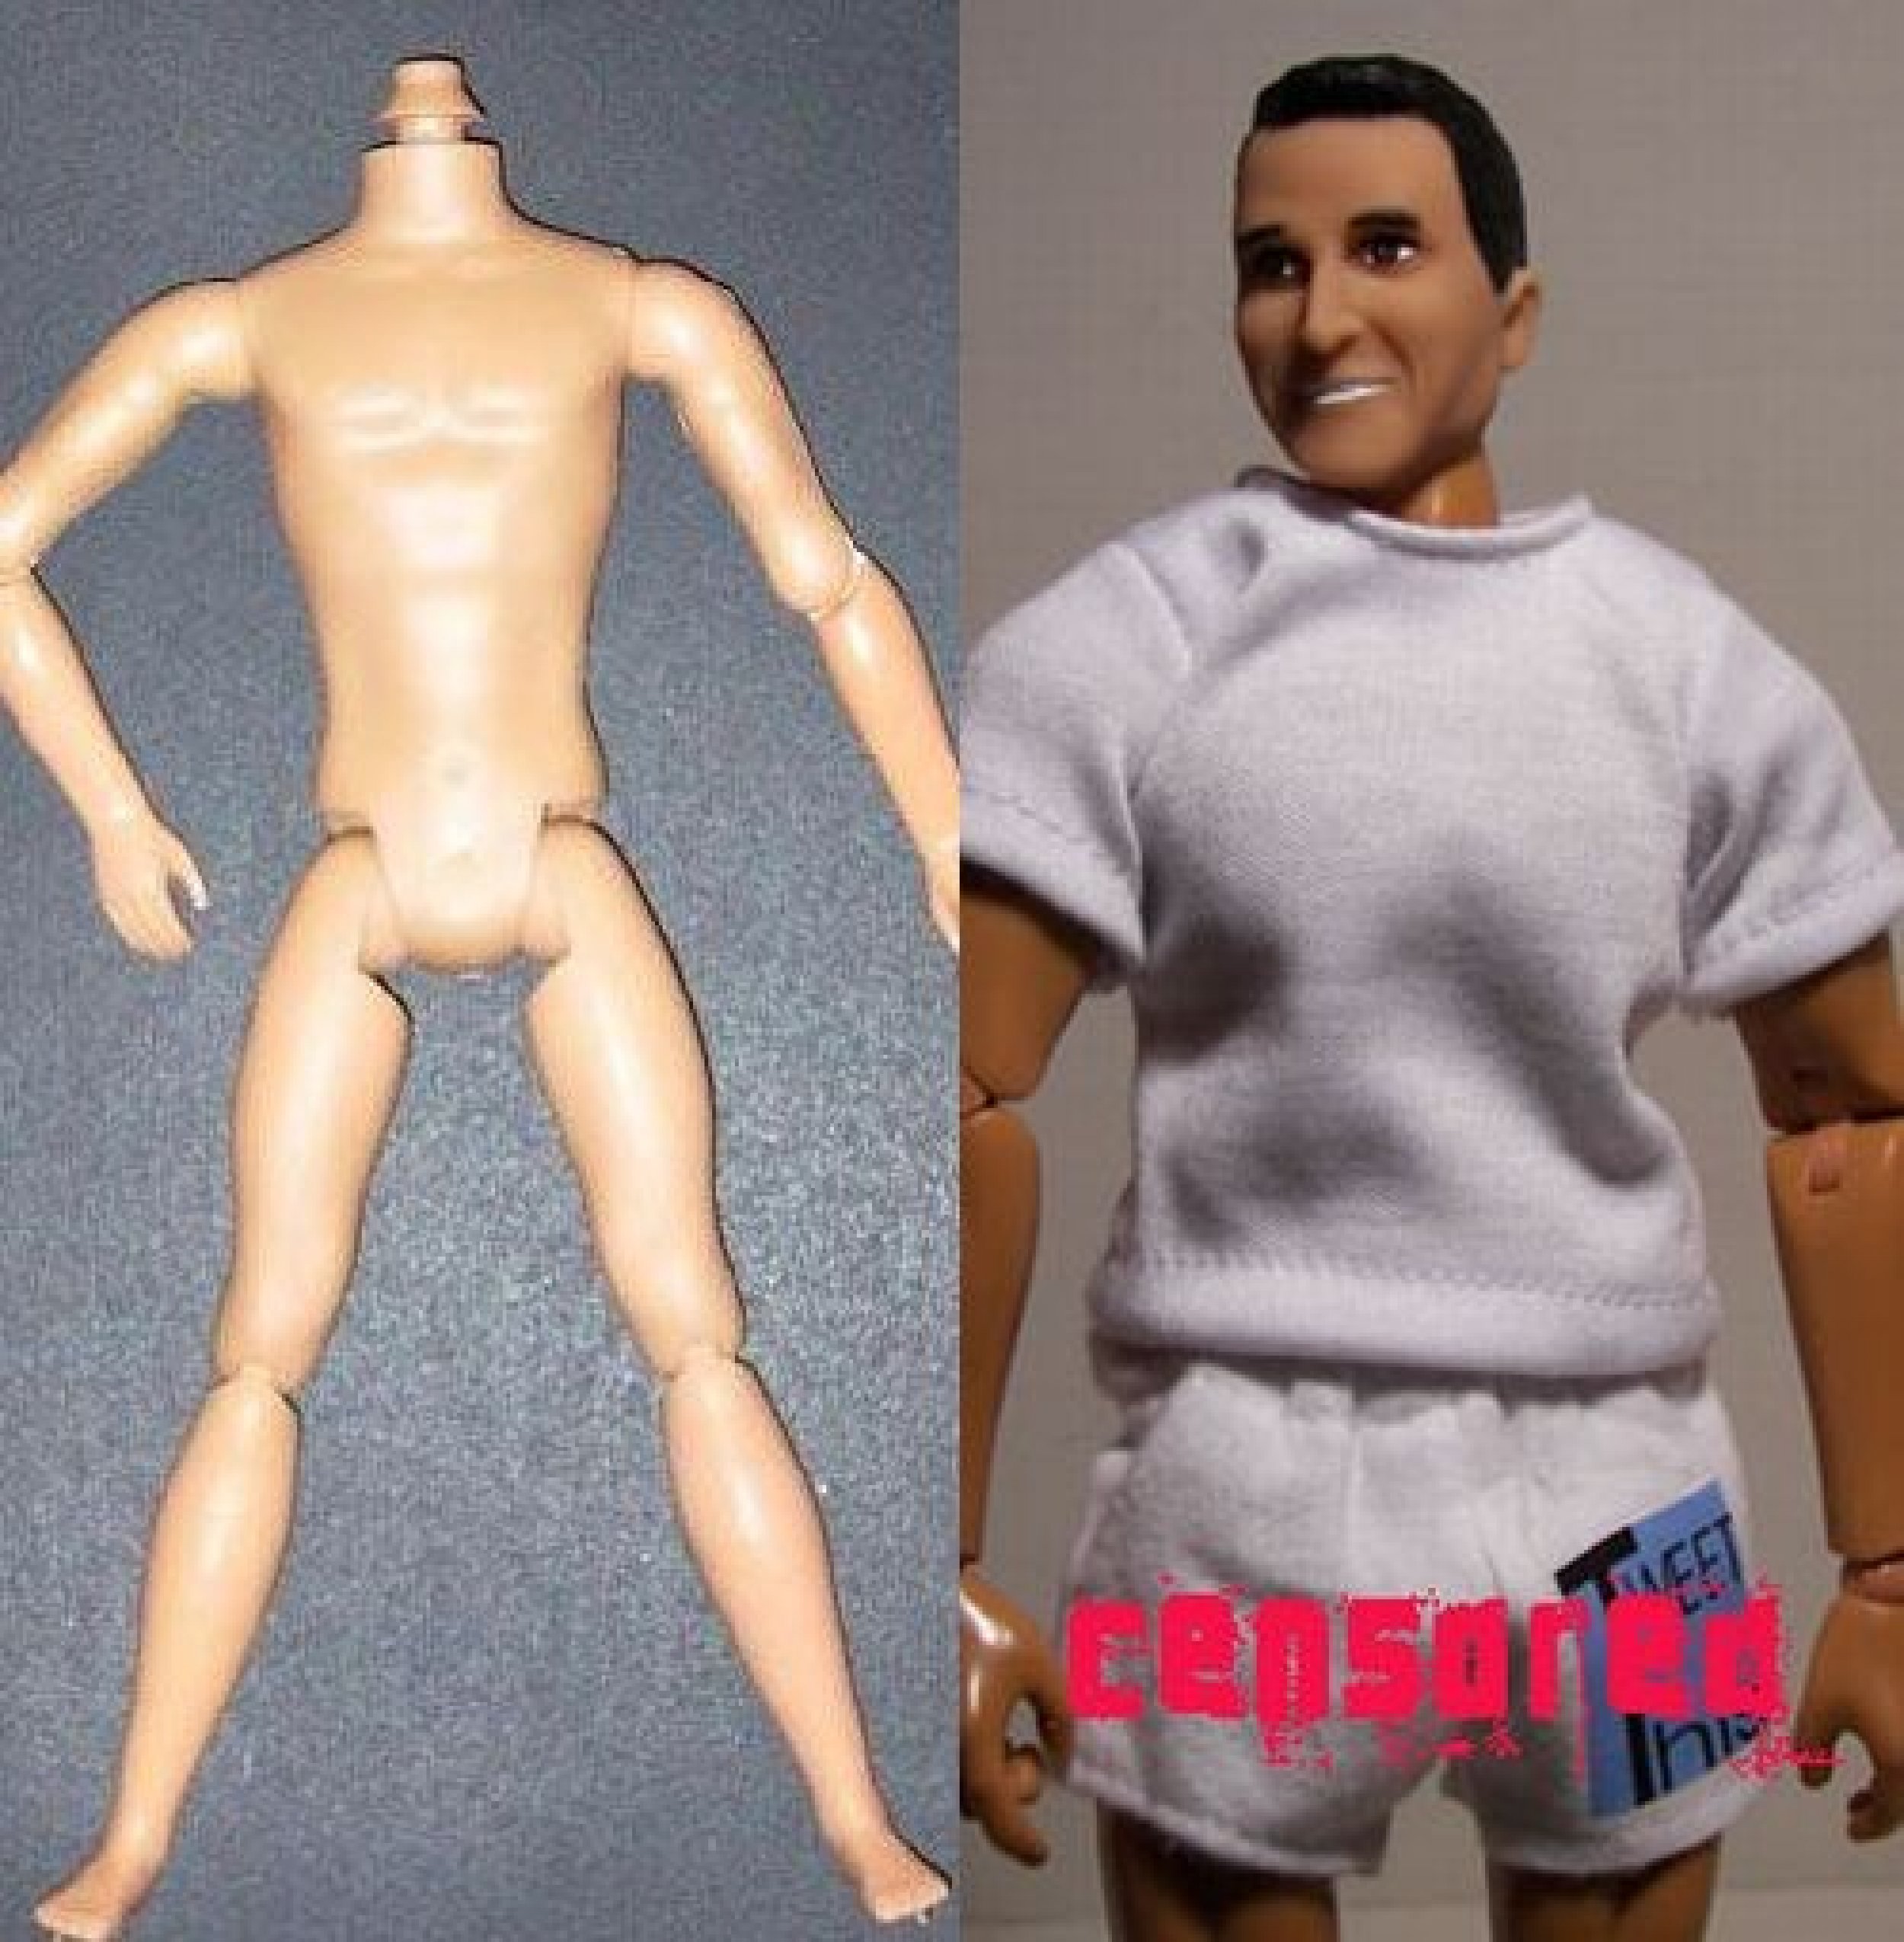 Anthony Weiner lewd photo inspires his doll